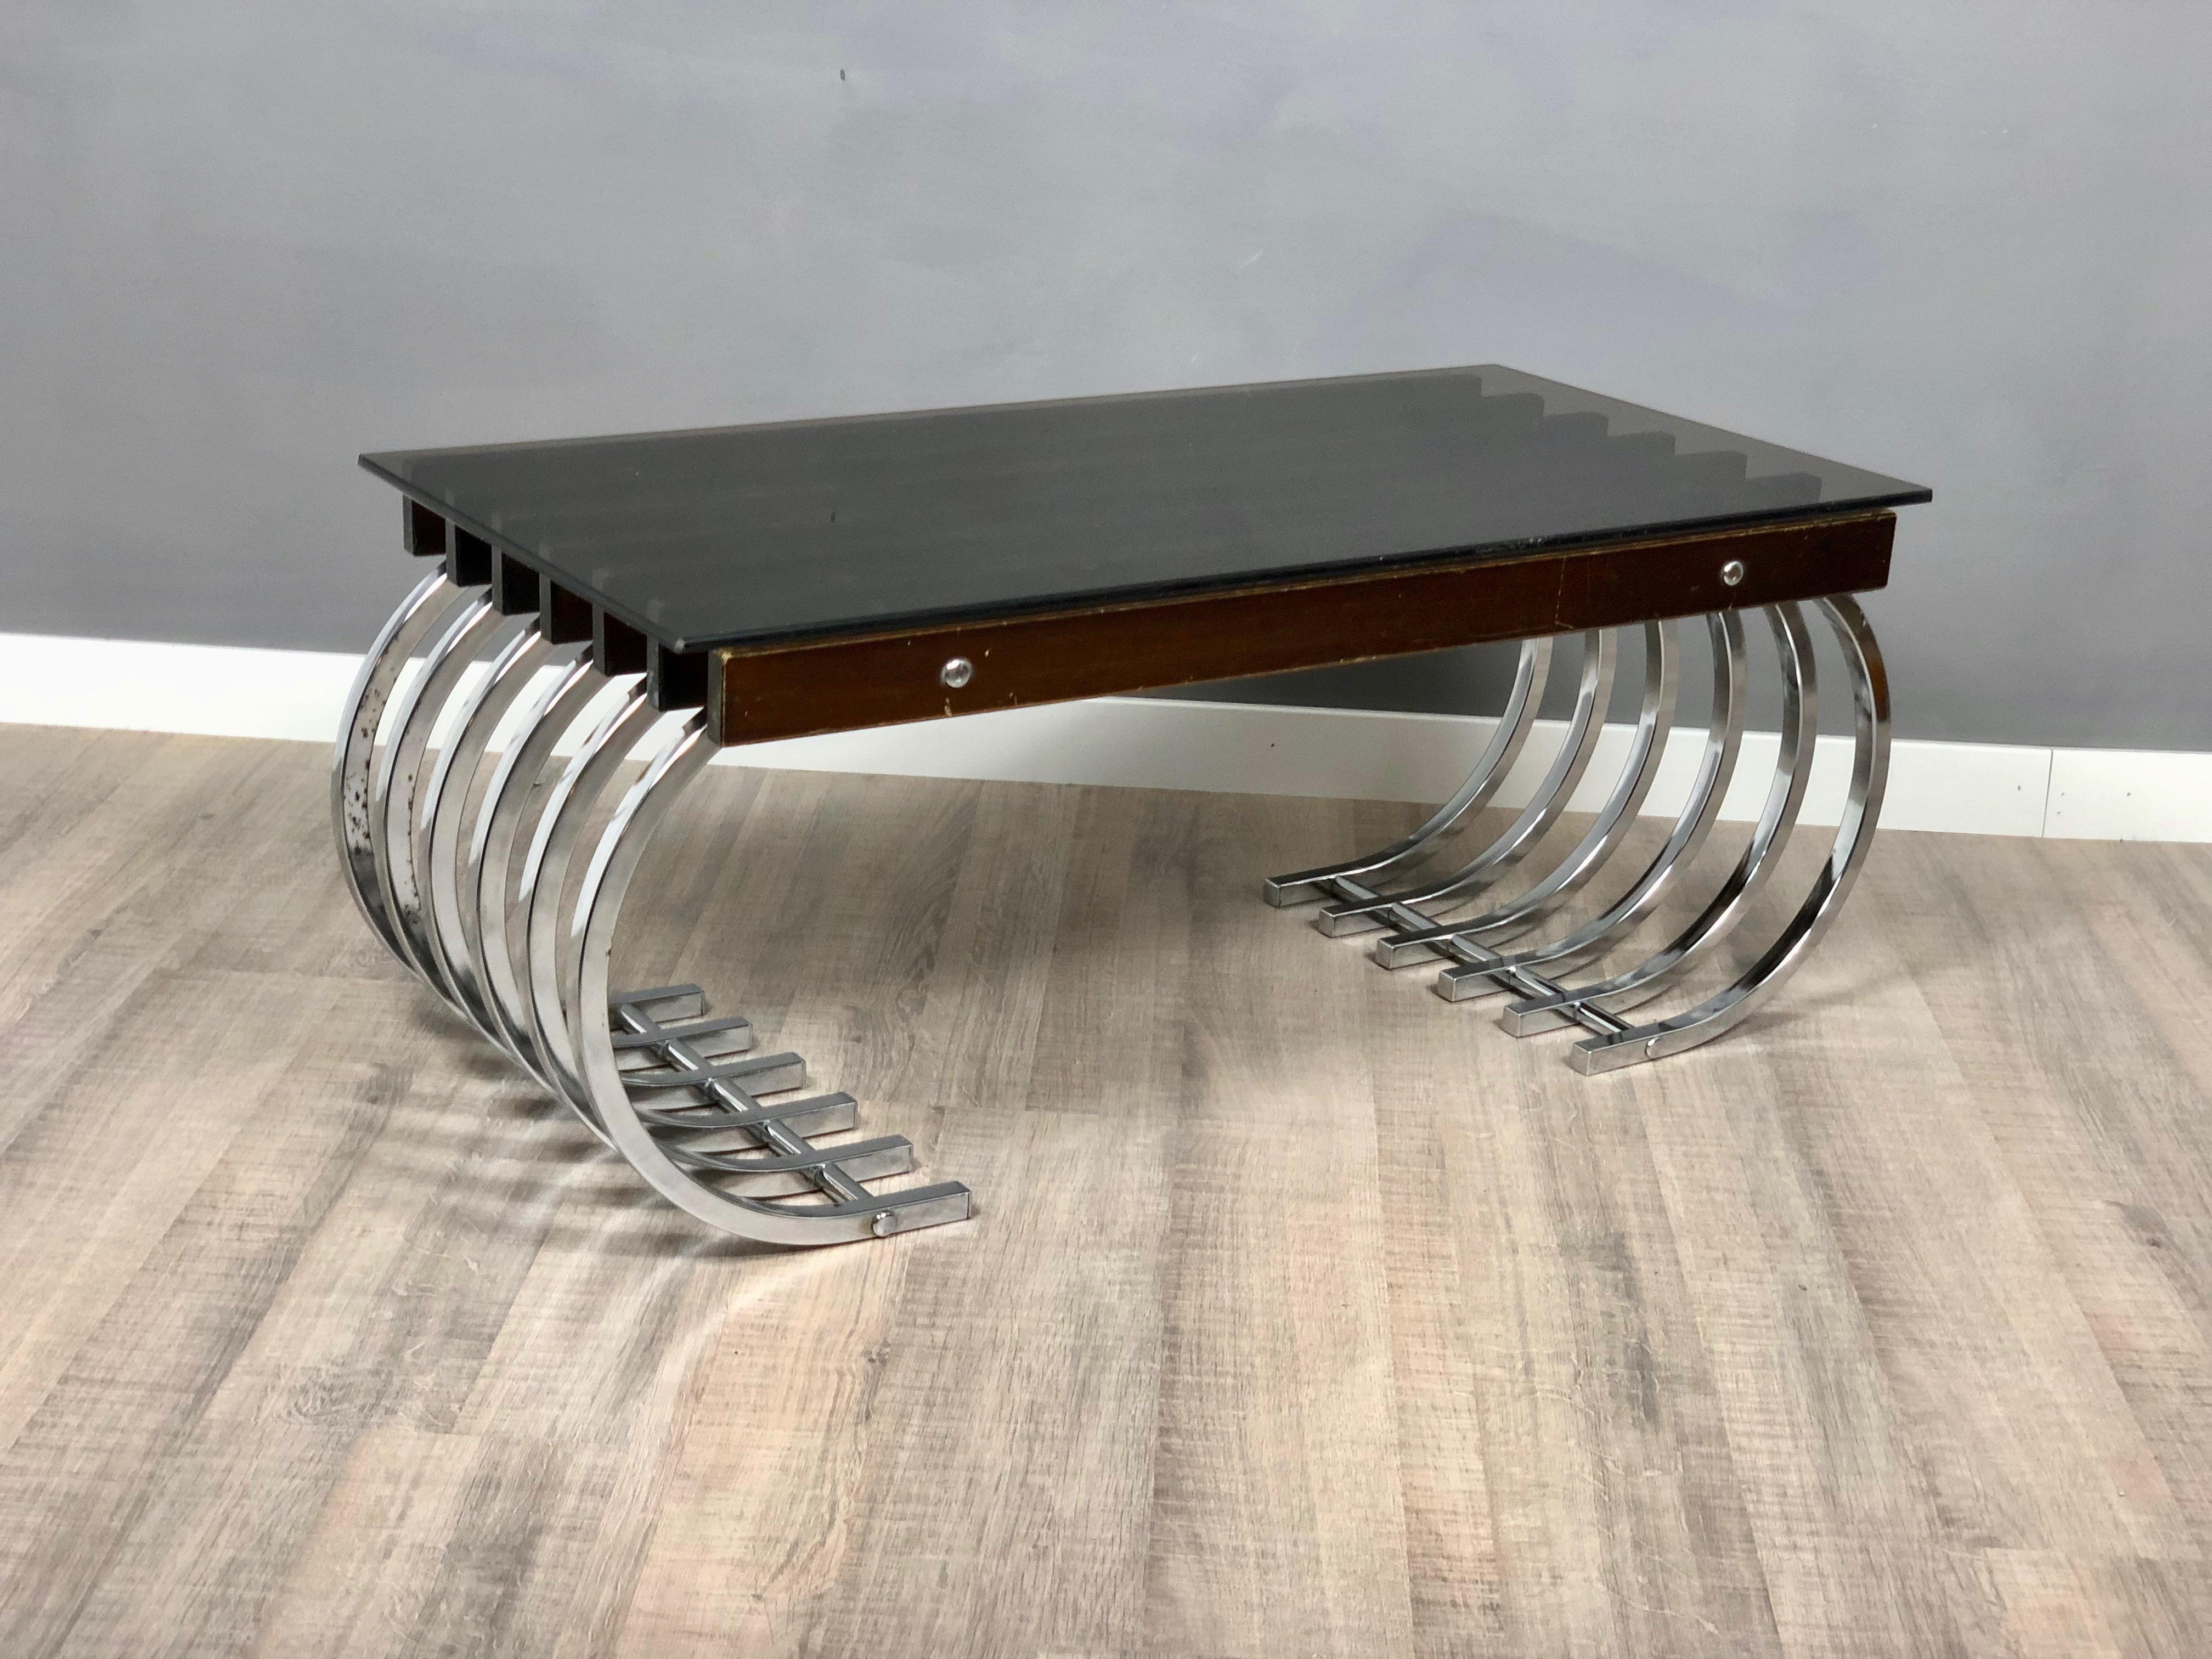 Amazing side or coffee table with curved chrome legs and the base of the table is made of wooden beams on which the smoked glass surface rests. The chrome and the wood have some sign of the time, as the photos show.